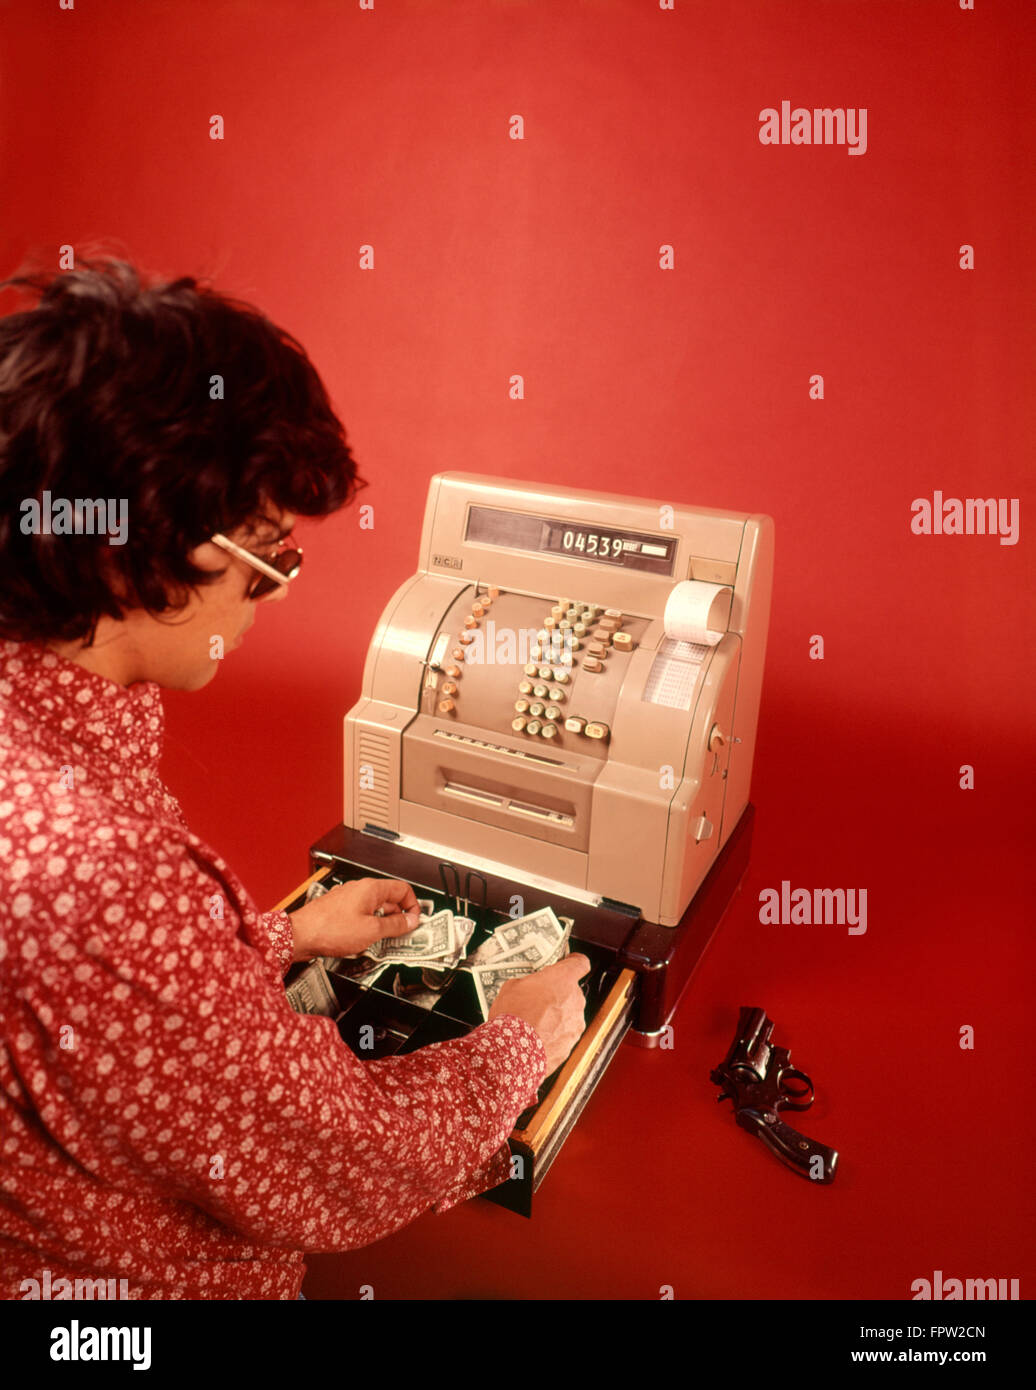 1970s MAN ROBBER ARMED WITH GUN WEARING SUNGLASSES BLACK WIG AND RED PRINT SHIRT STEALING MONEY FROM CASH REGISTER DRAWER Stock Photo